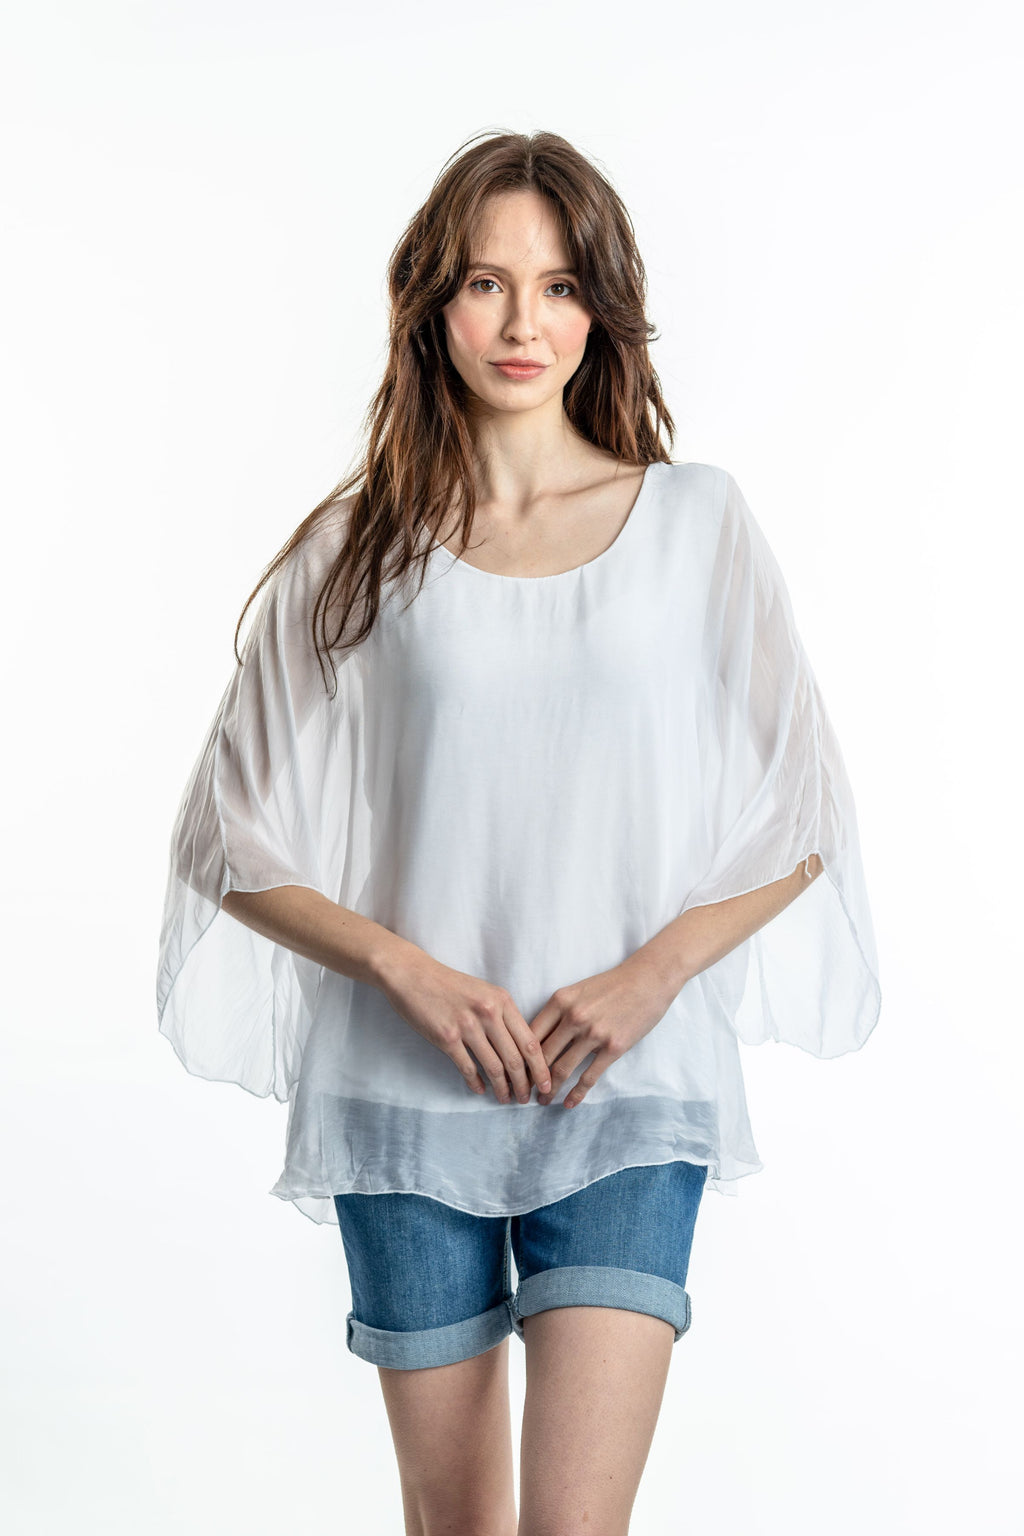 MARY S23 White Silk Top